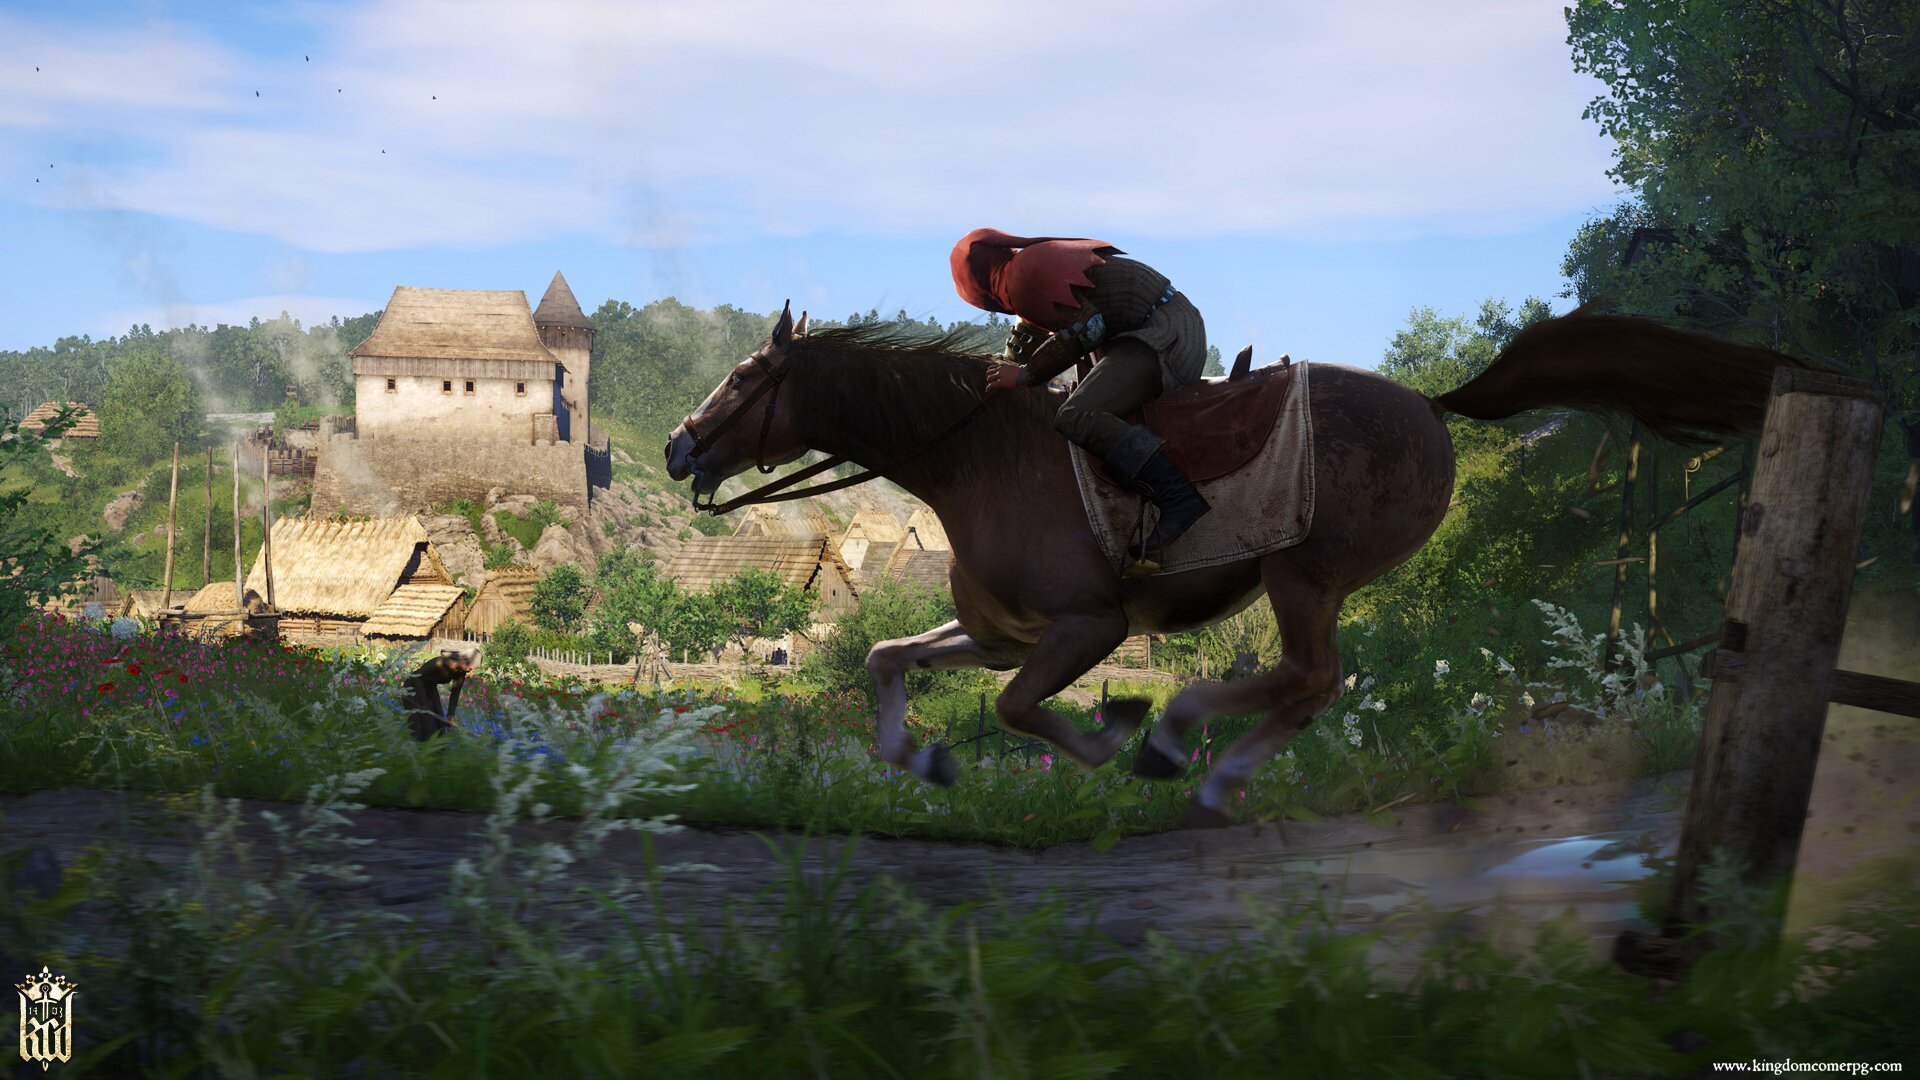 Kingdom: Come Deliverance Is Renowned For Featuring Highly Realistic Combat | Image Source: Steam